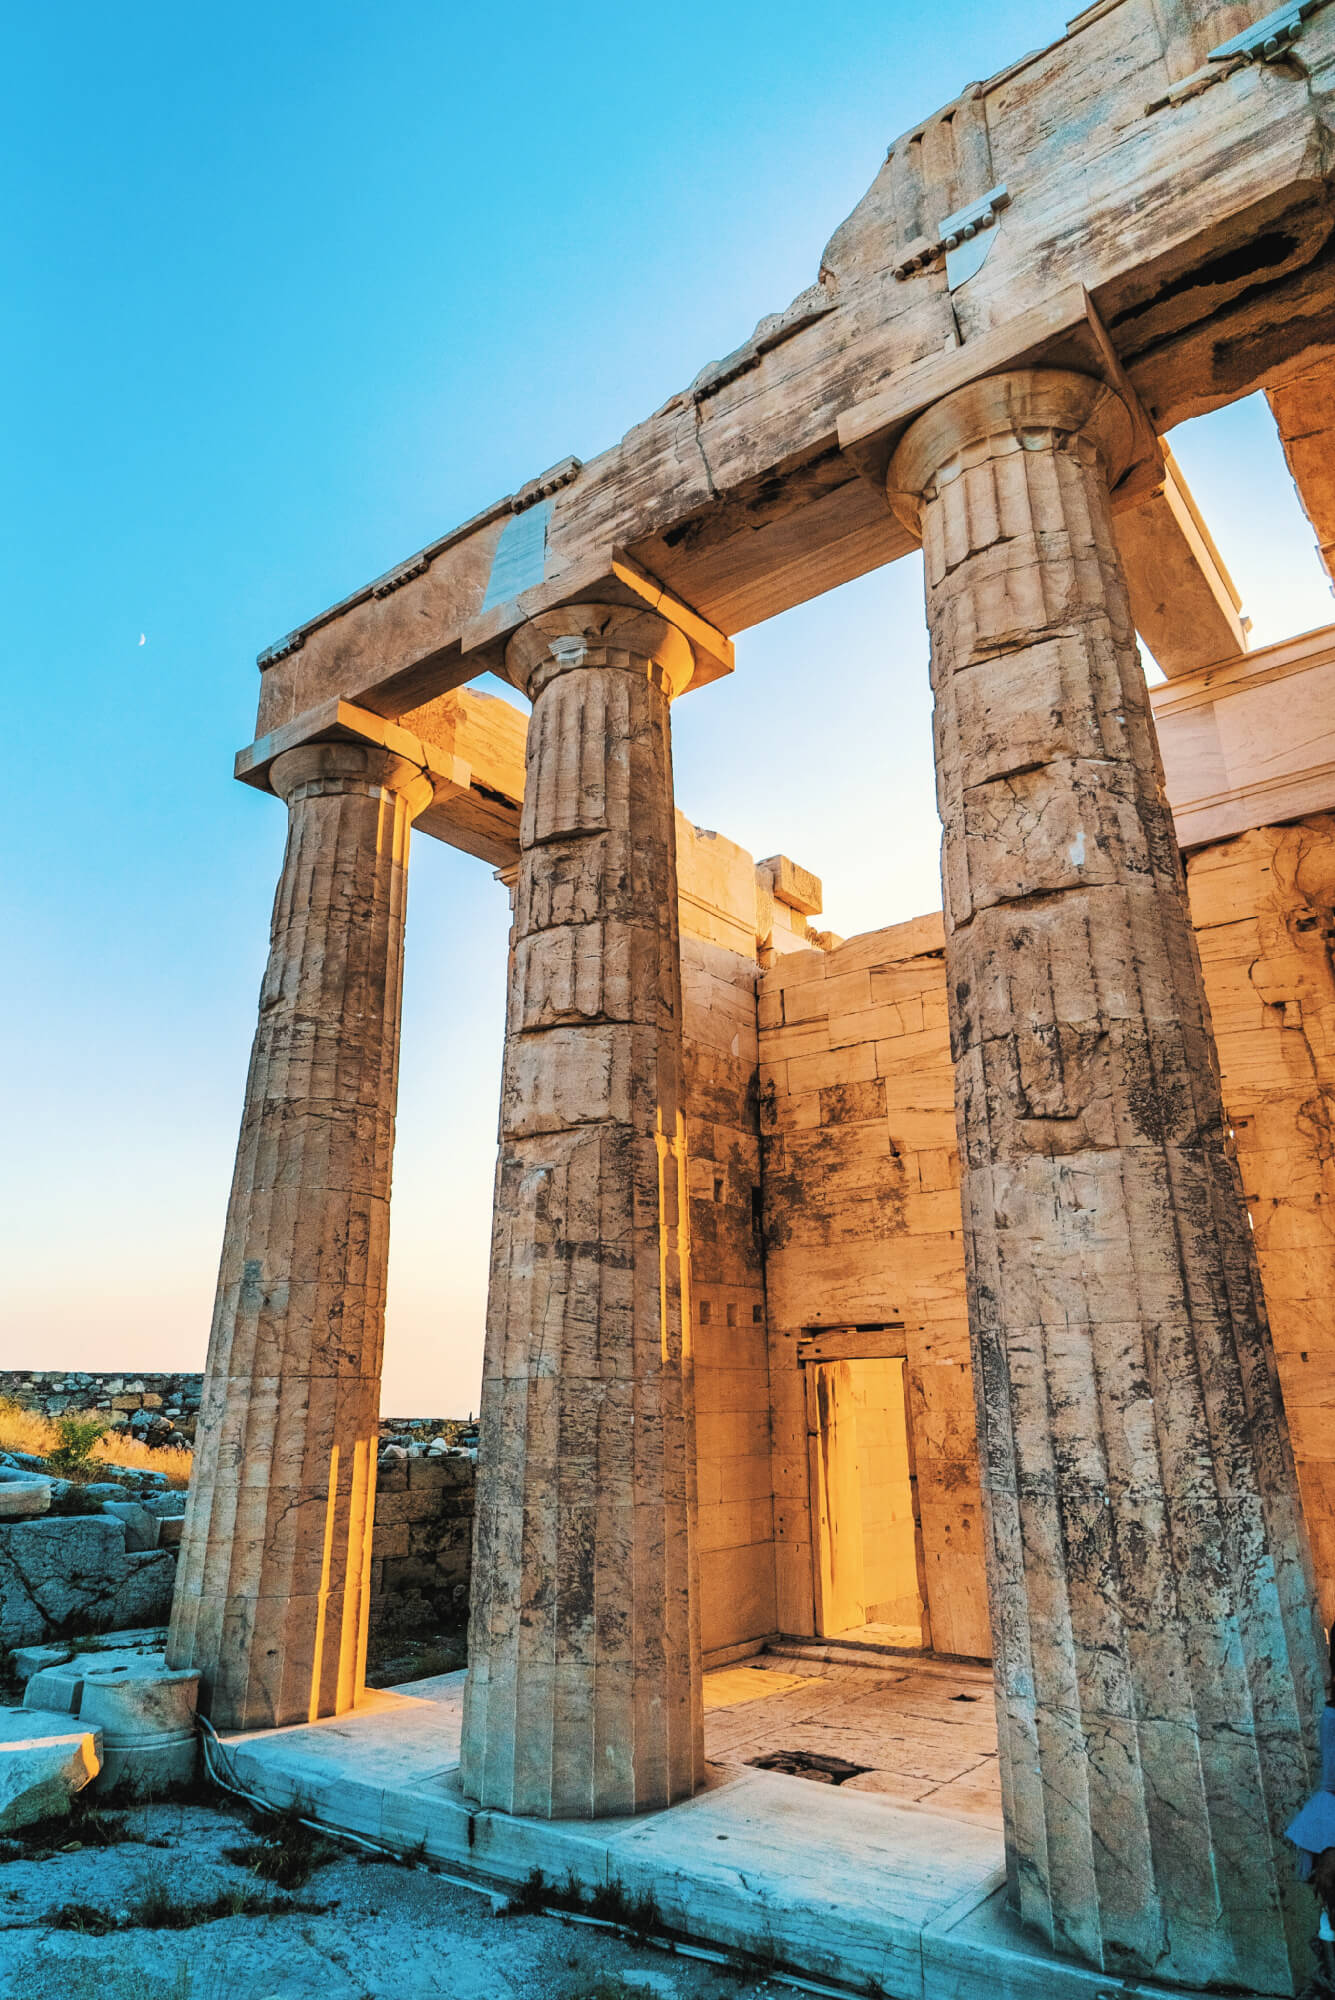 The Parthenon in Athens is a must-see while spending 3 days in Athens.